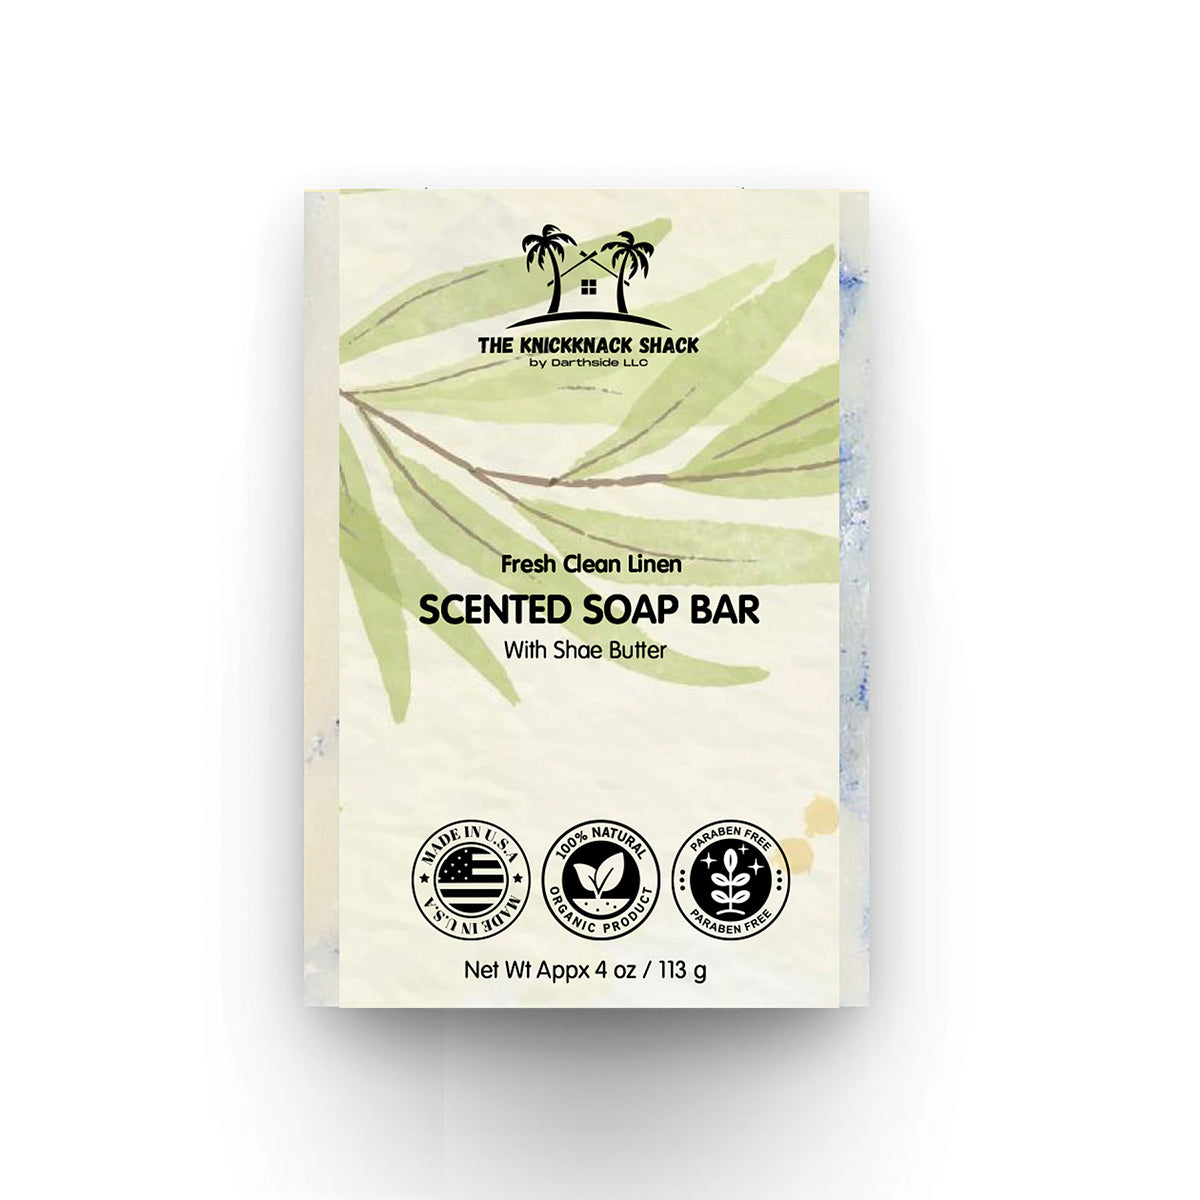 Fresh Clean Linen Scented Soap Bar with Shae Butter